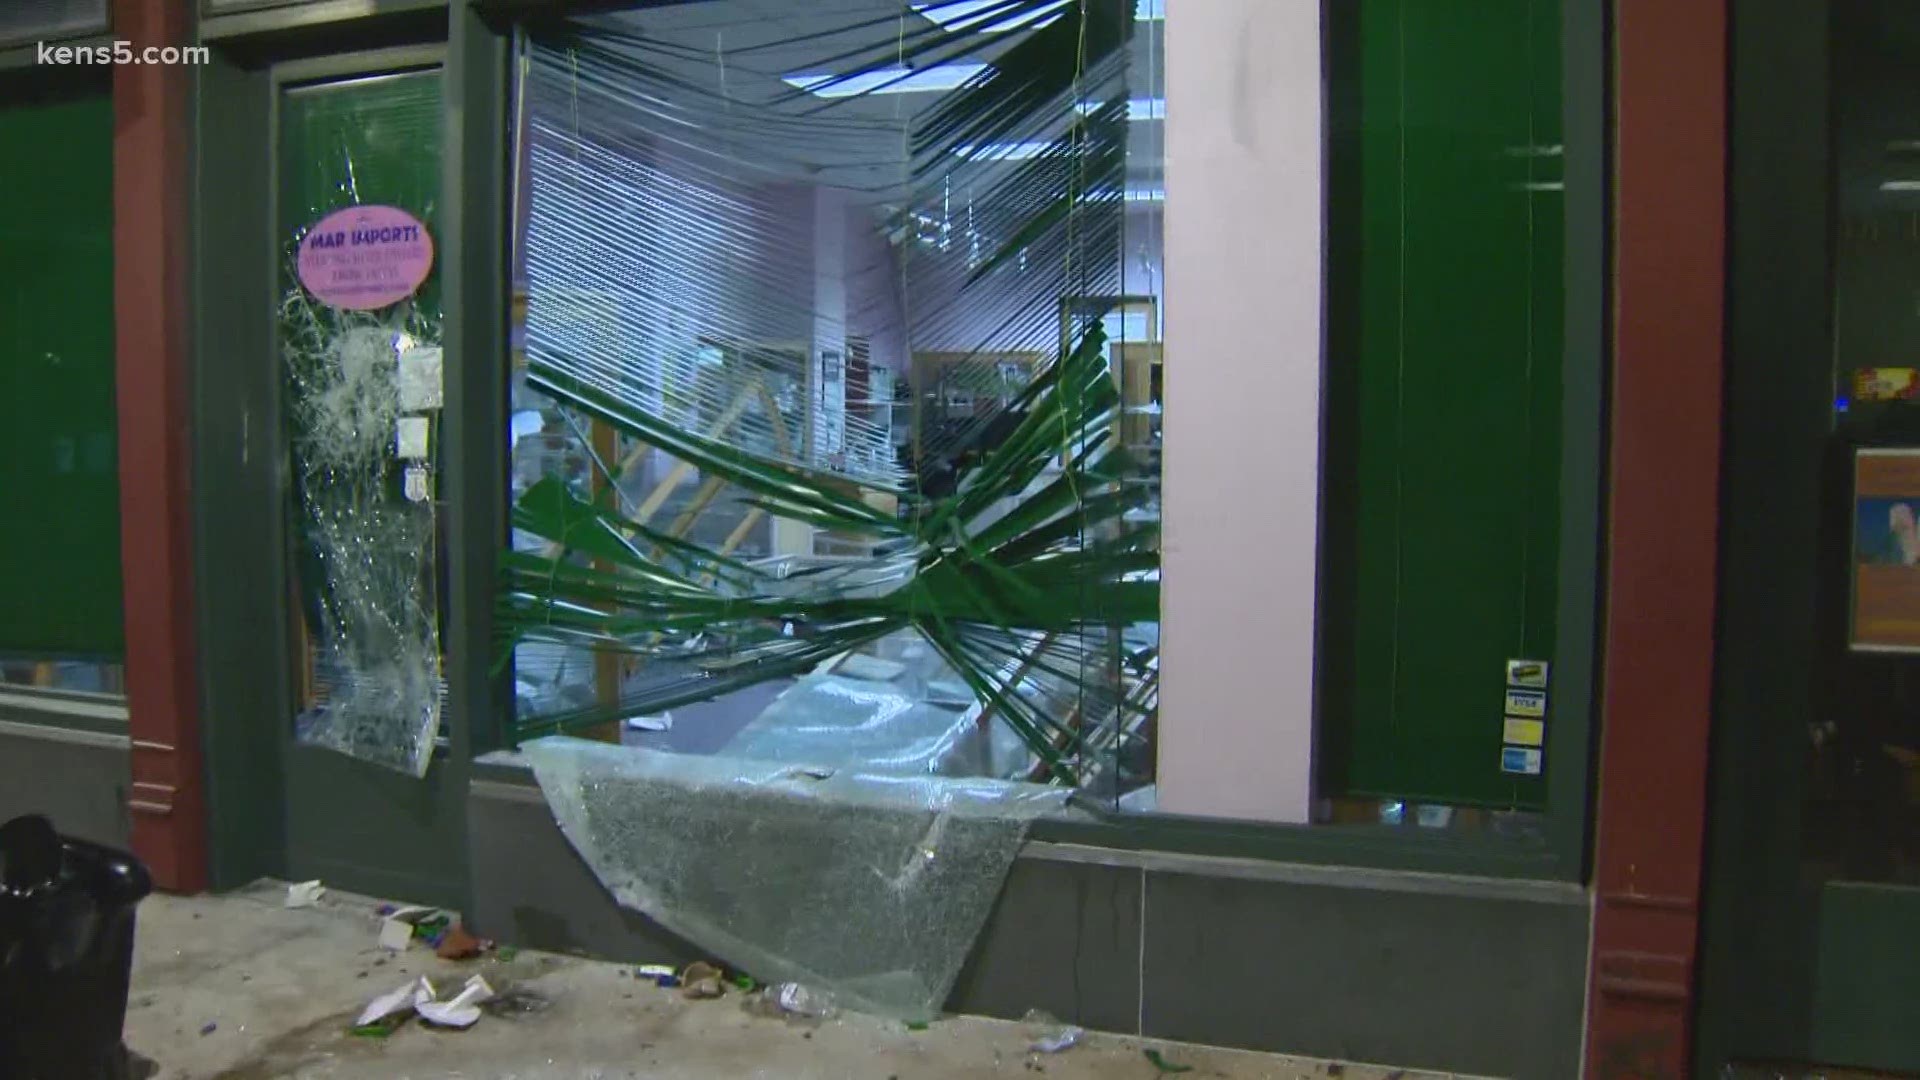 Businesses were destroyed and stores were looted overnight in downtown San Antonio following the peaceful protests earlier Saturday.